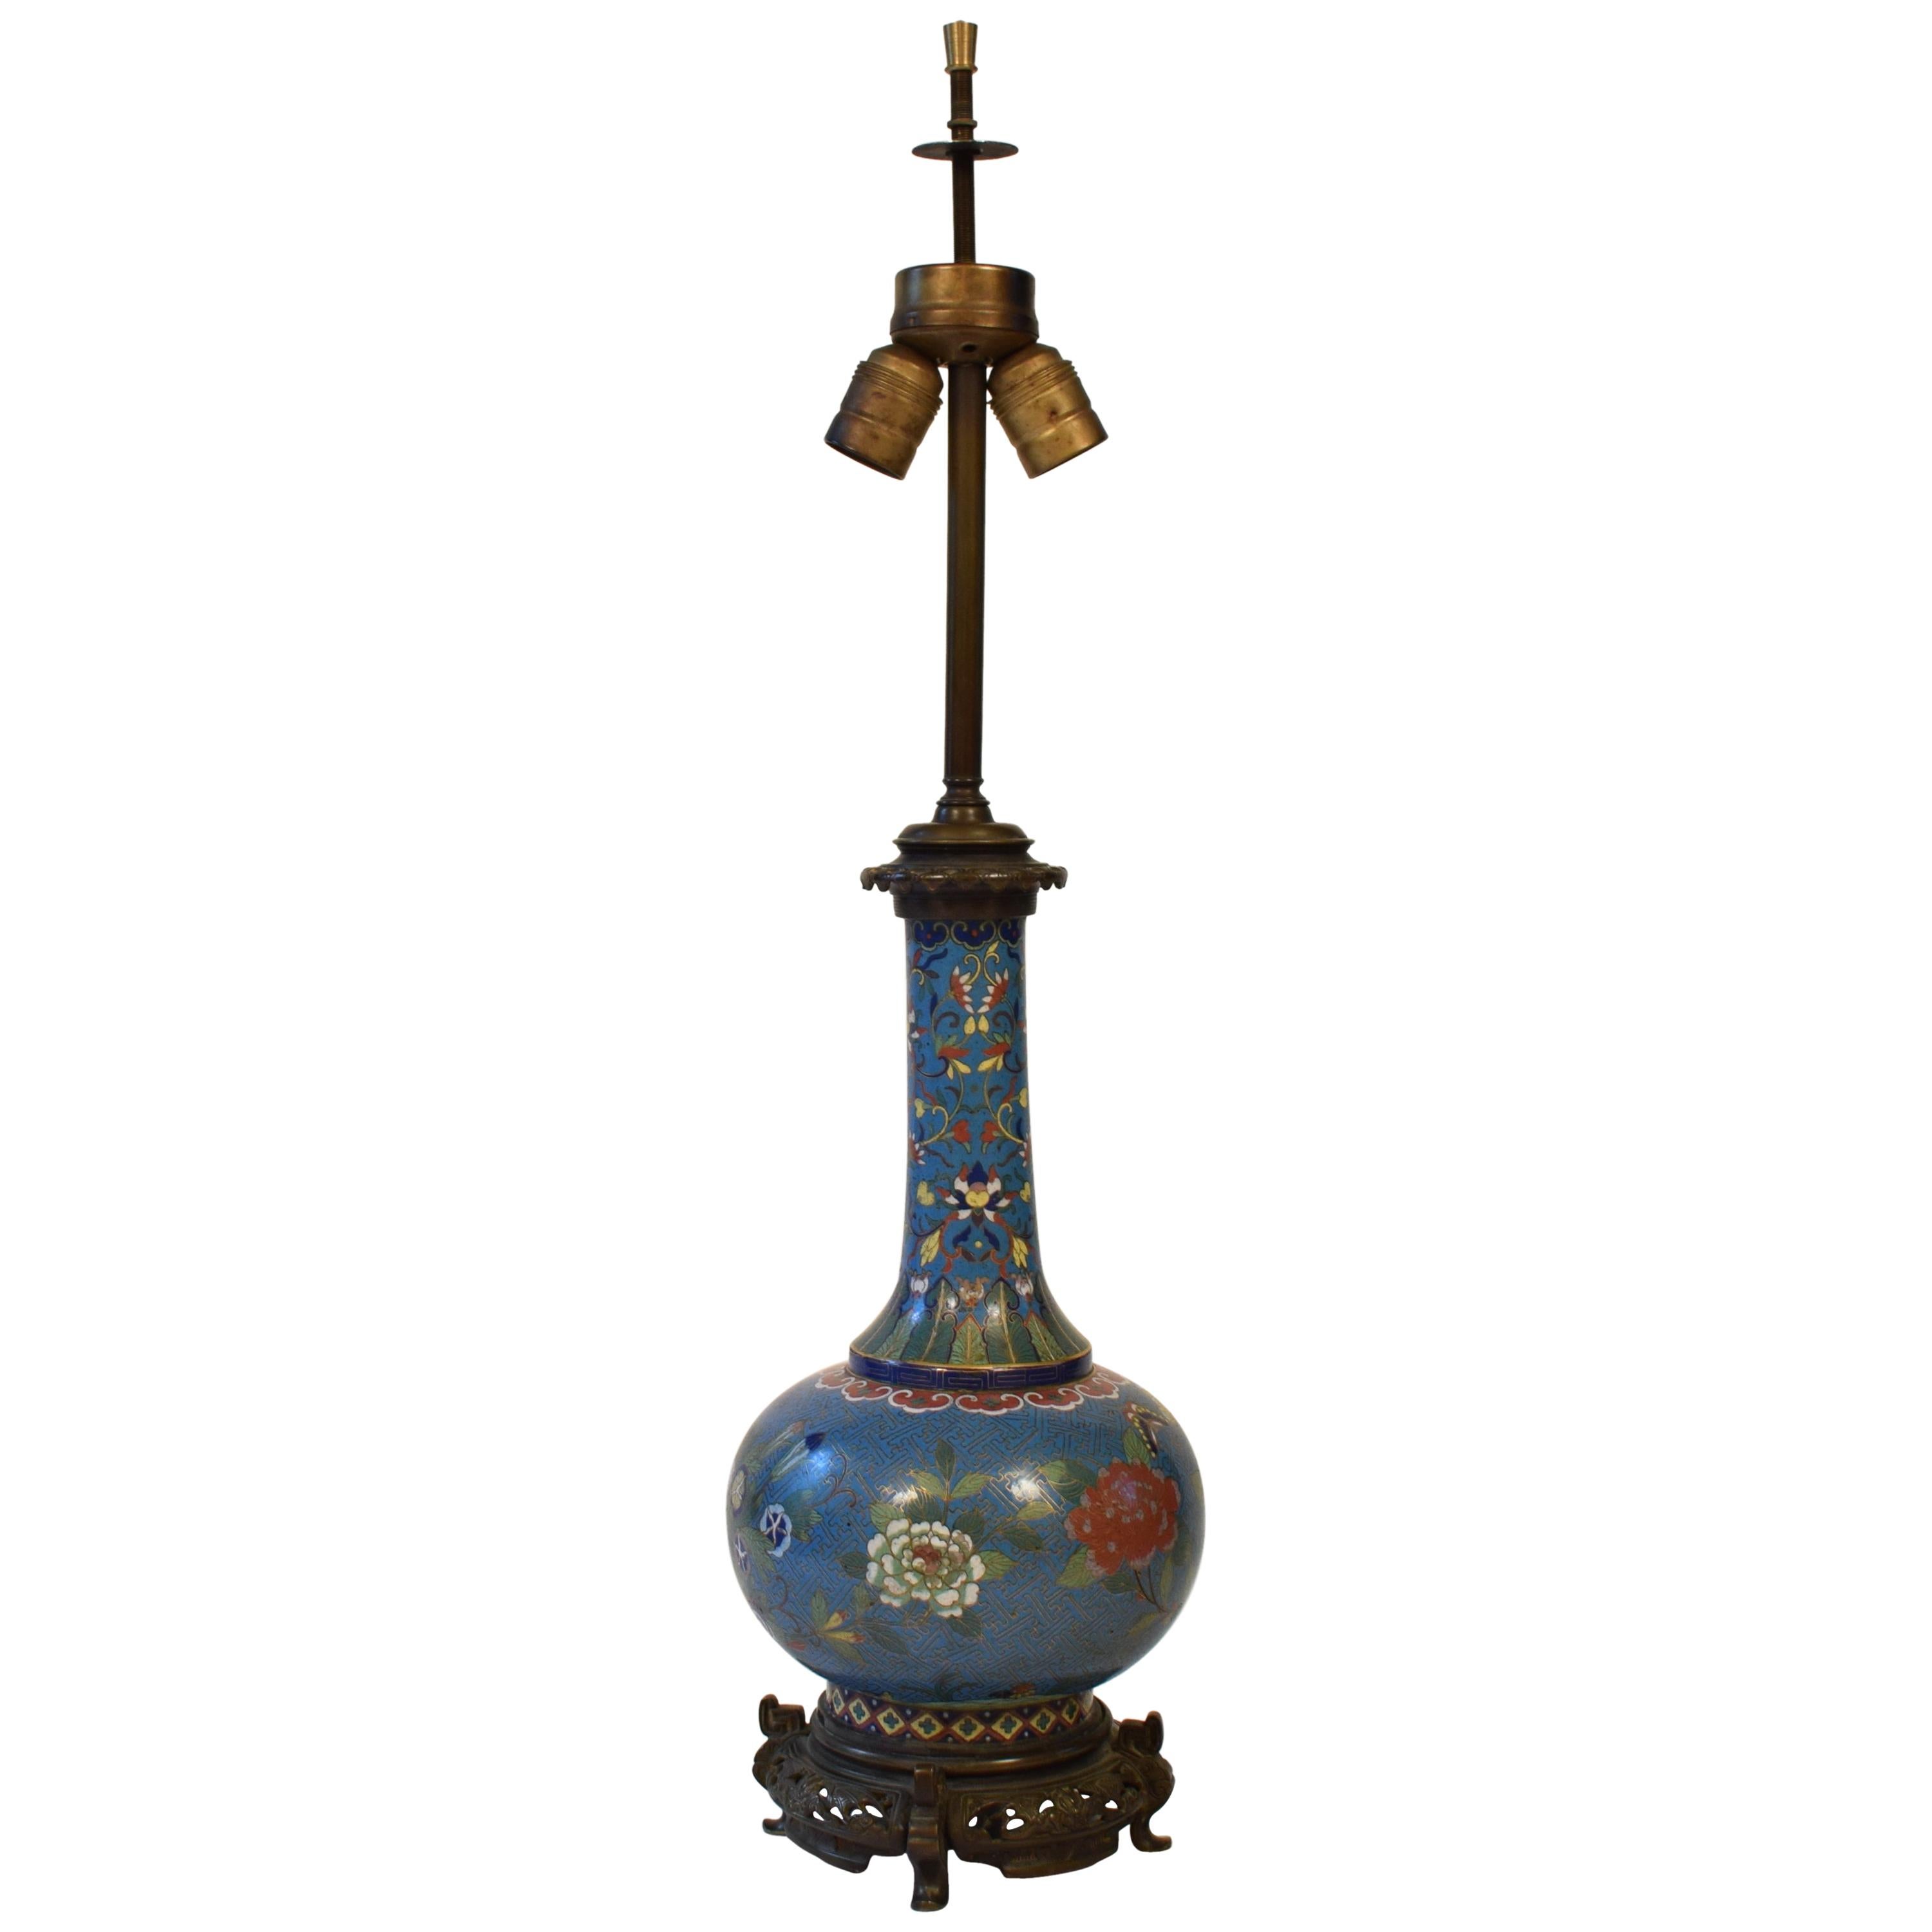 19th Century Bronze-Mounted Chinese Enamel Coated Metal Table Lamp, circa 1880